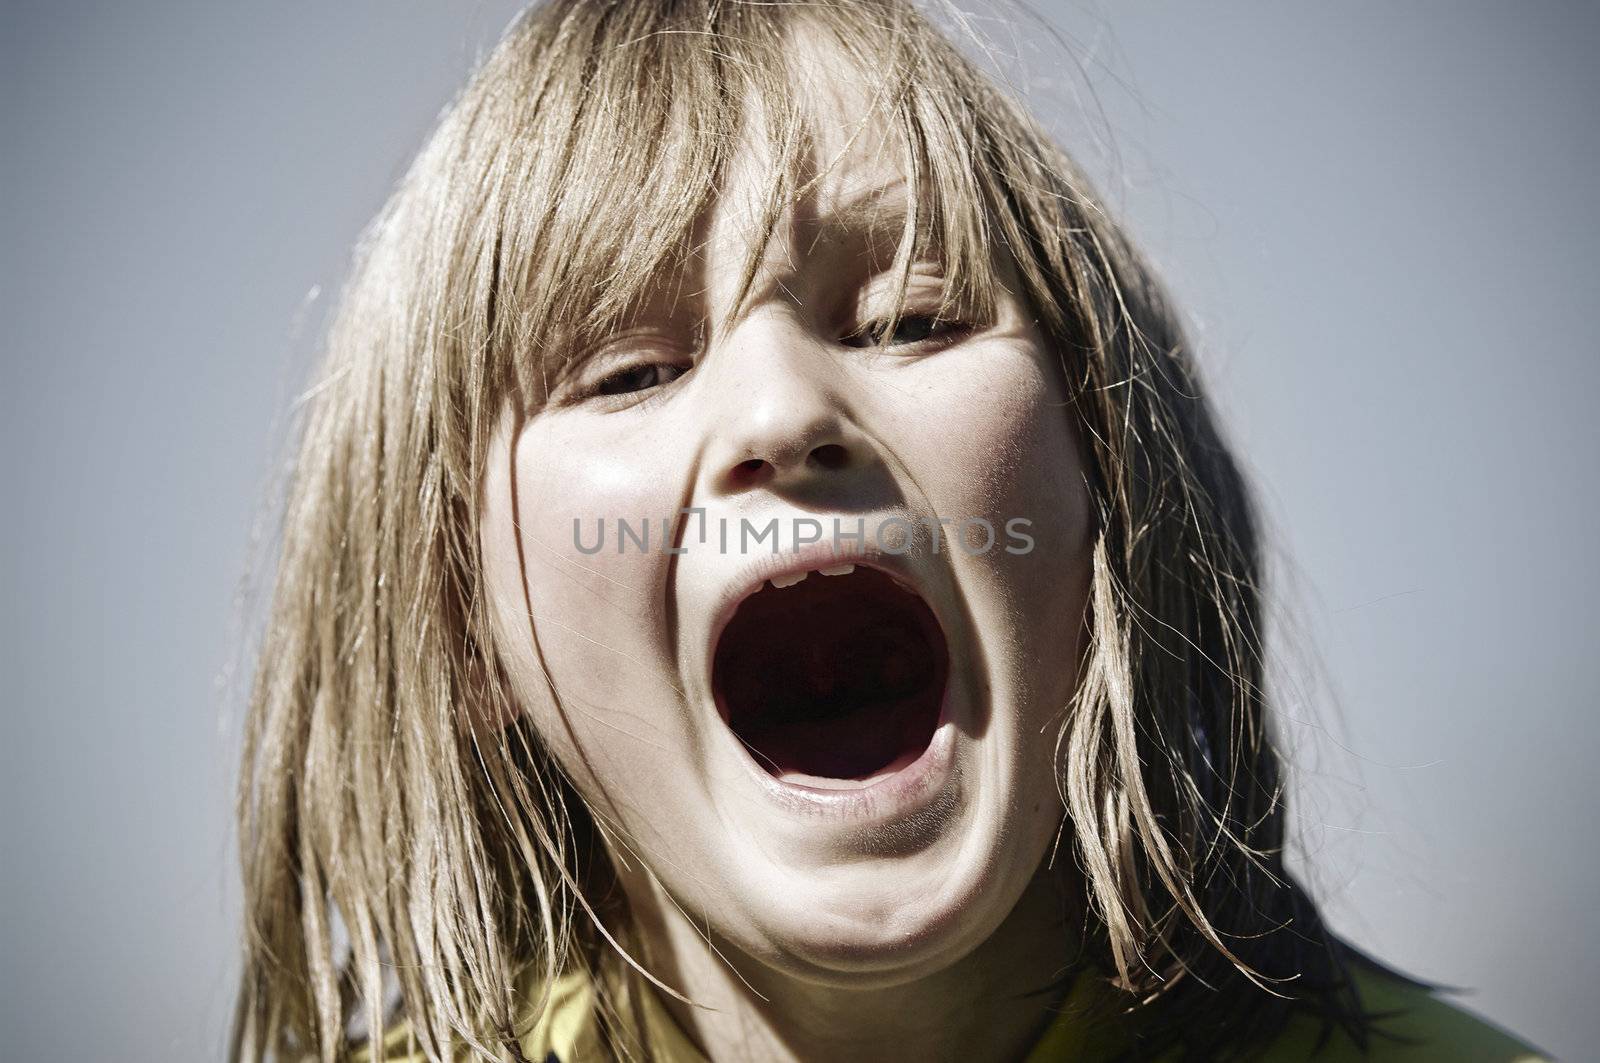 great cross processed style miage of a young girl mouth open yelling